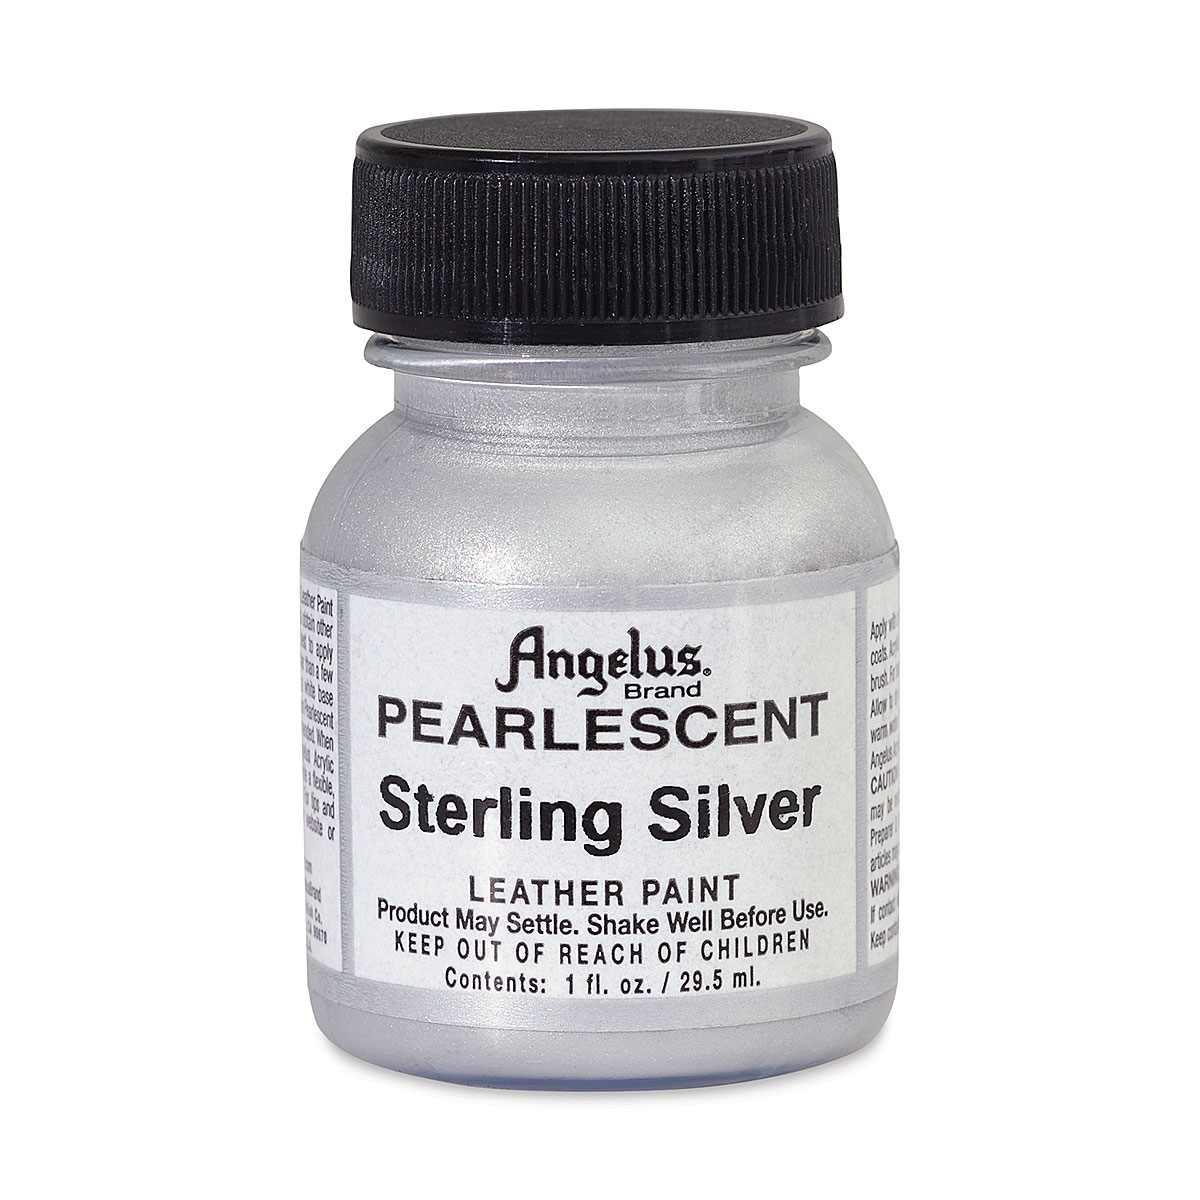 Angelus Leather Paint Pearlescent Sterling Silver, 4 oz